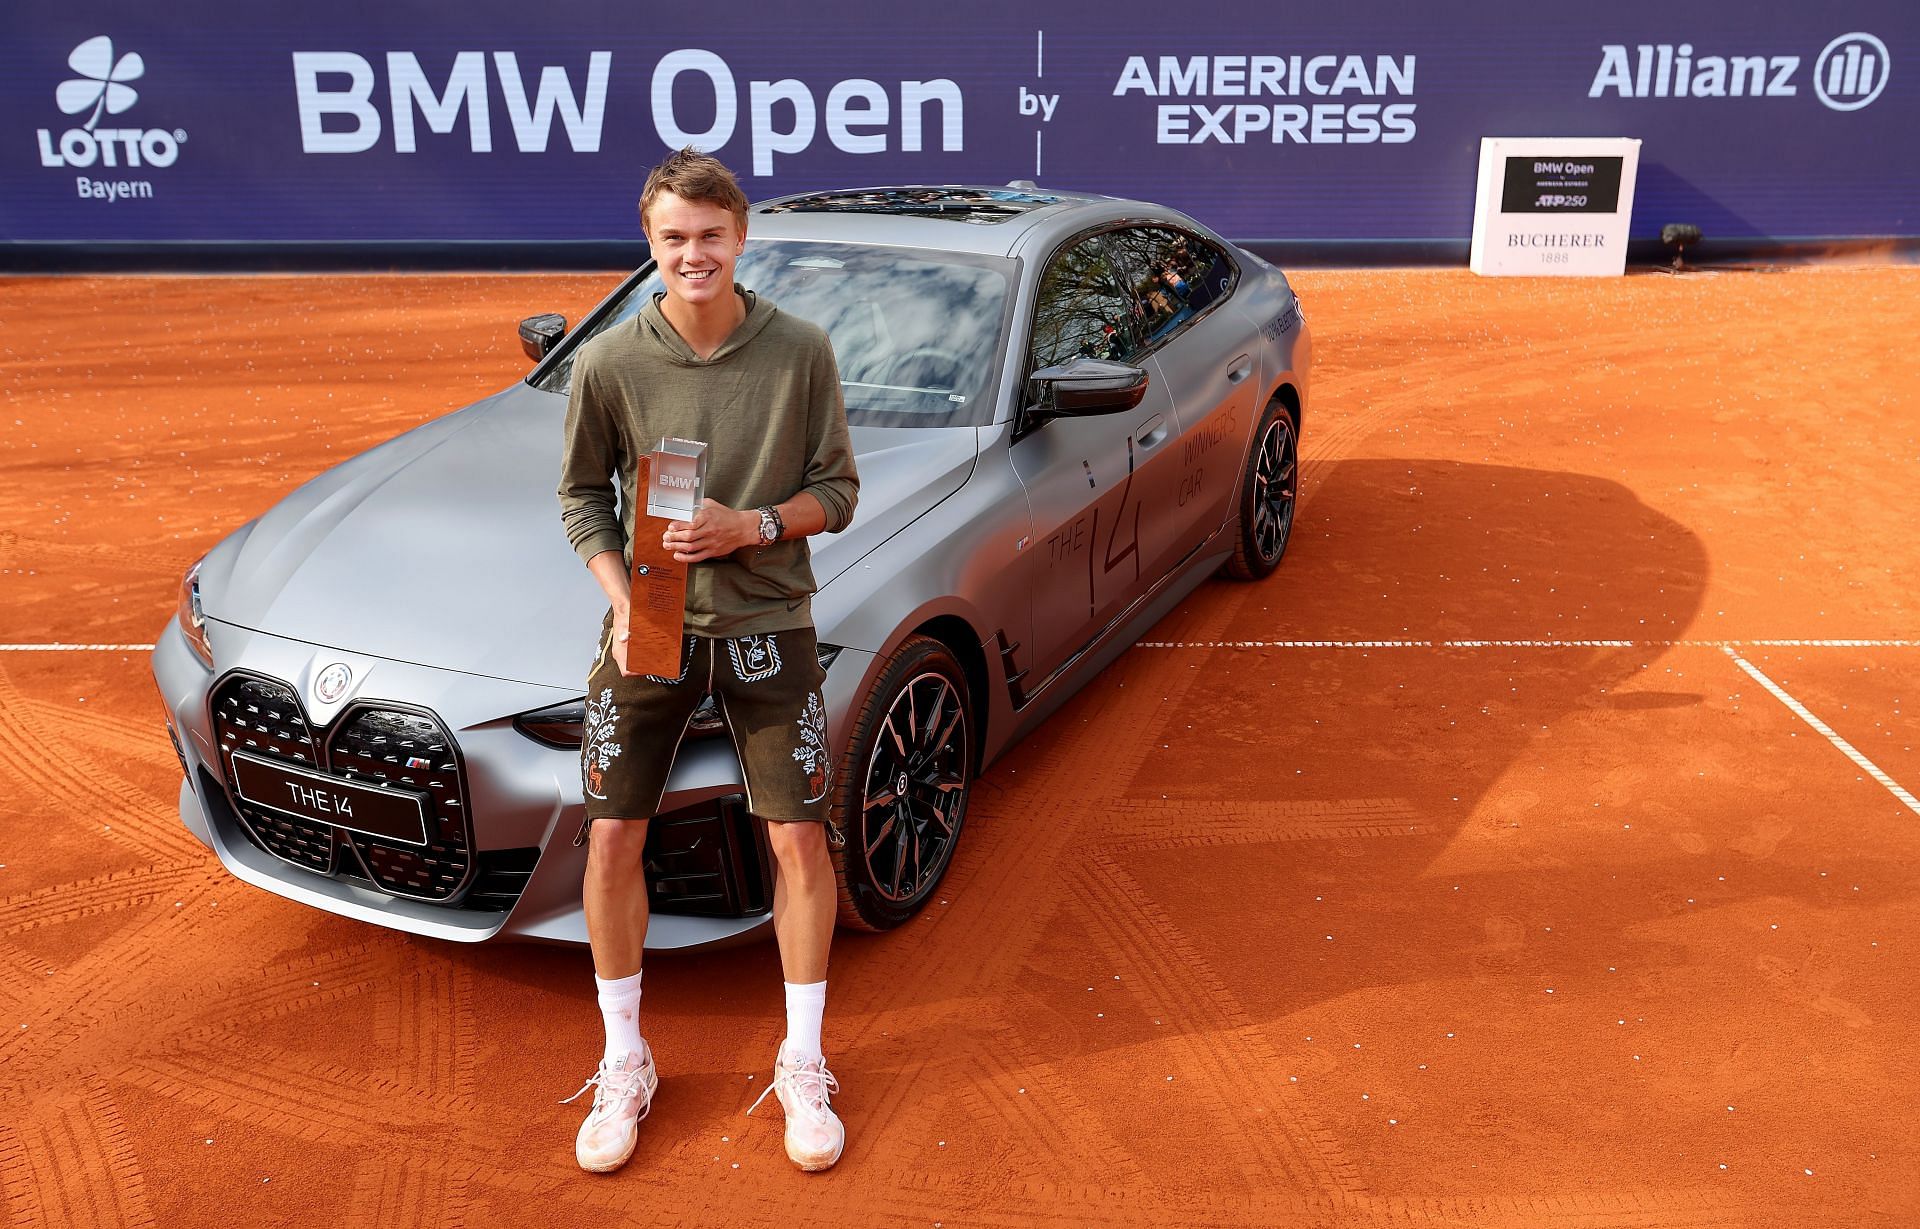 Apart from being the Monte-Masters runner-up in 2023, Holger Rune was the runner-up in Rome, quarterfinalist at the French Open, and the champion in Munich